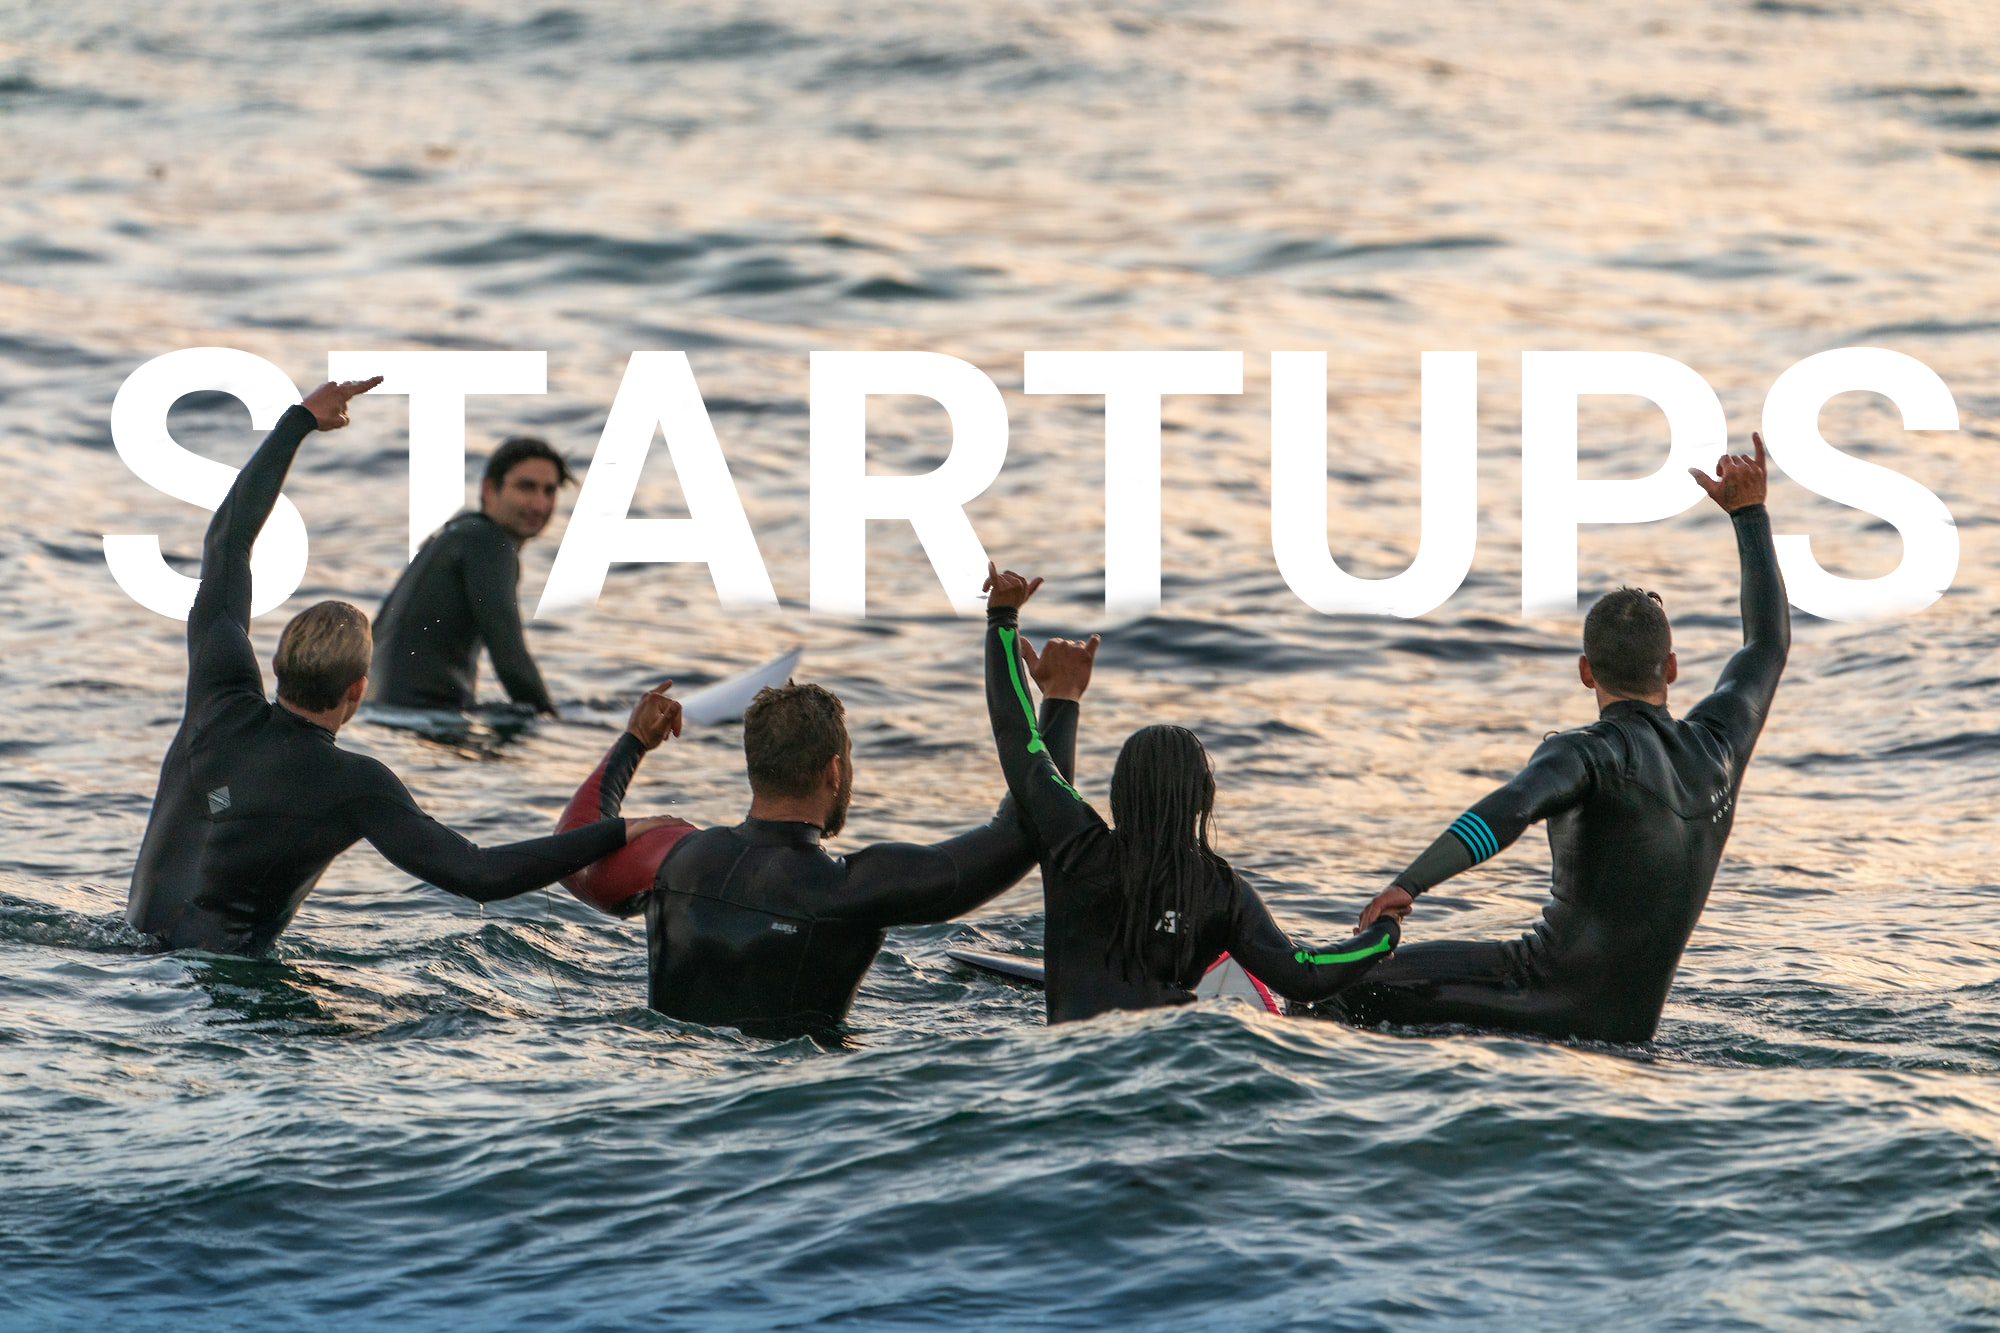 How Can Startups And Enterprise Startups Turn Their Business Idea Into Reality?